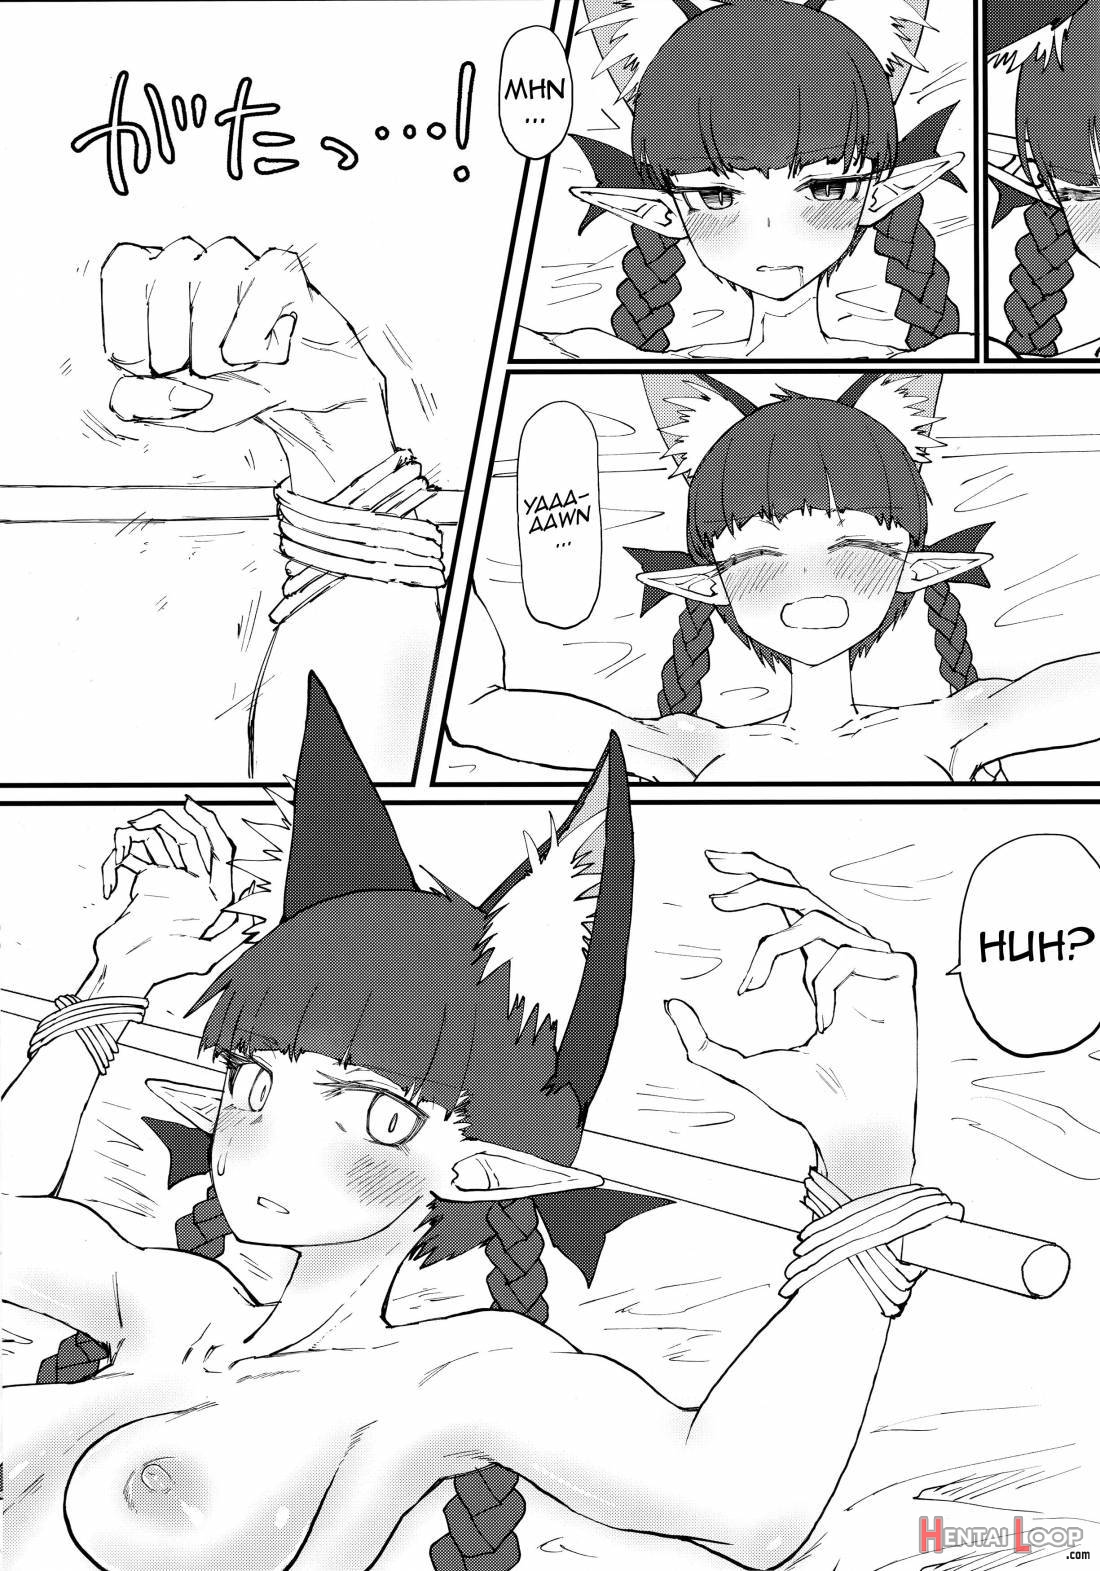 Hakeguchi Orin-chan!, Outlet For Desire: Orin! page 2